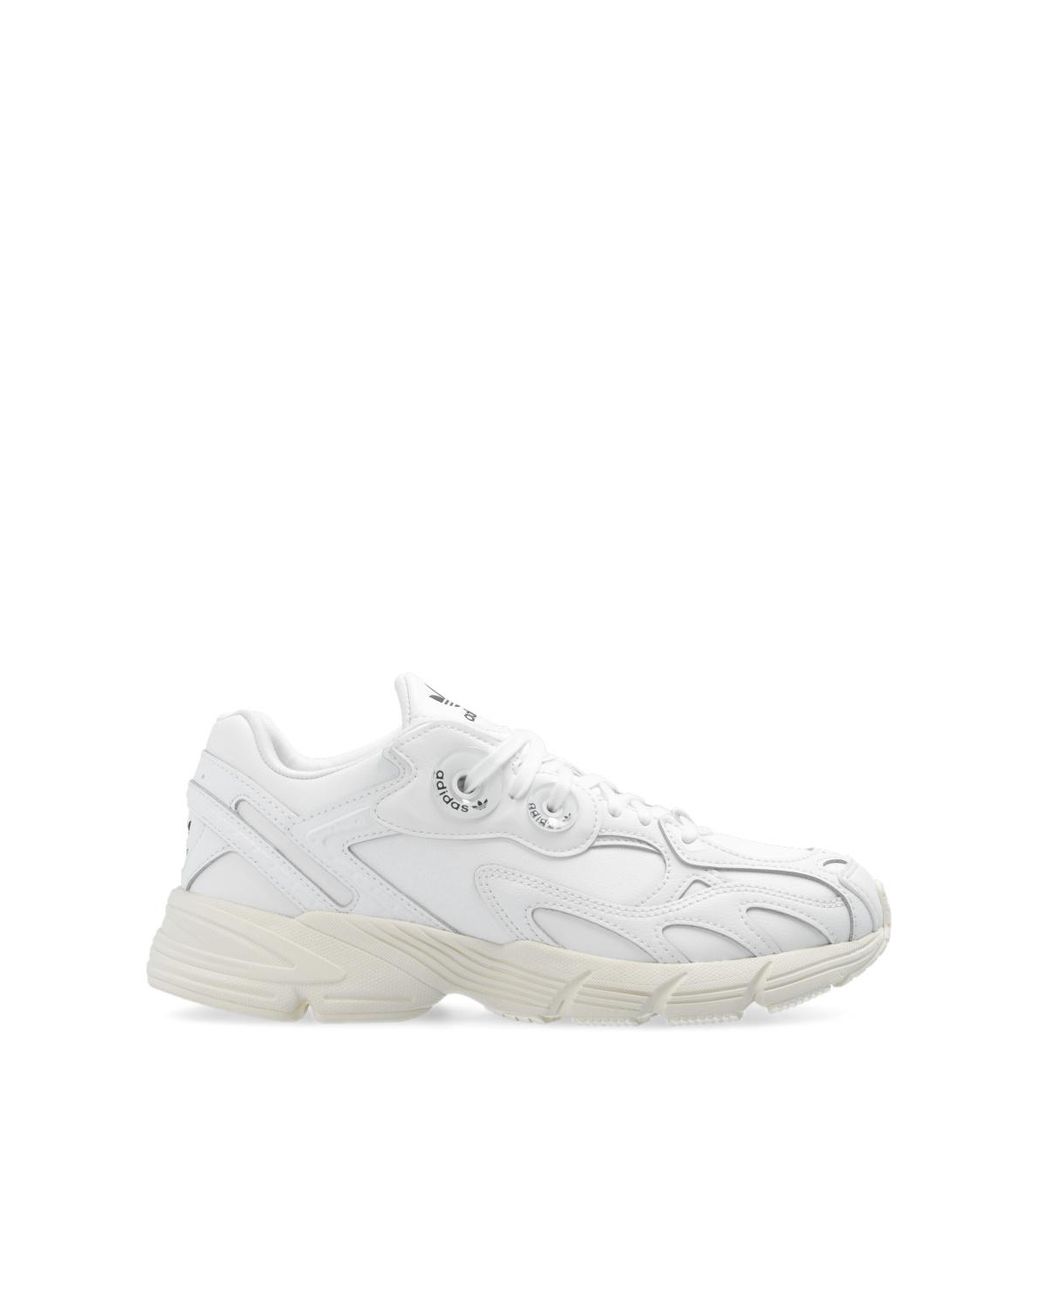 adidas Originals Leather 'astir' Sneakers in White | Lyst